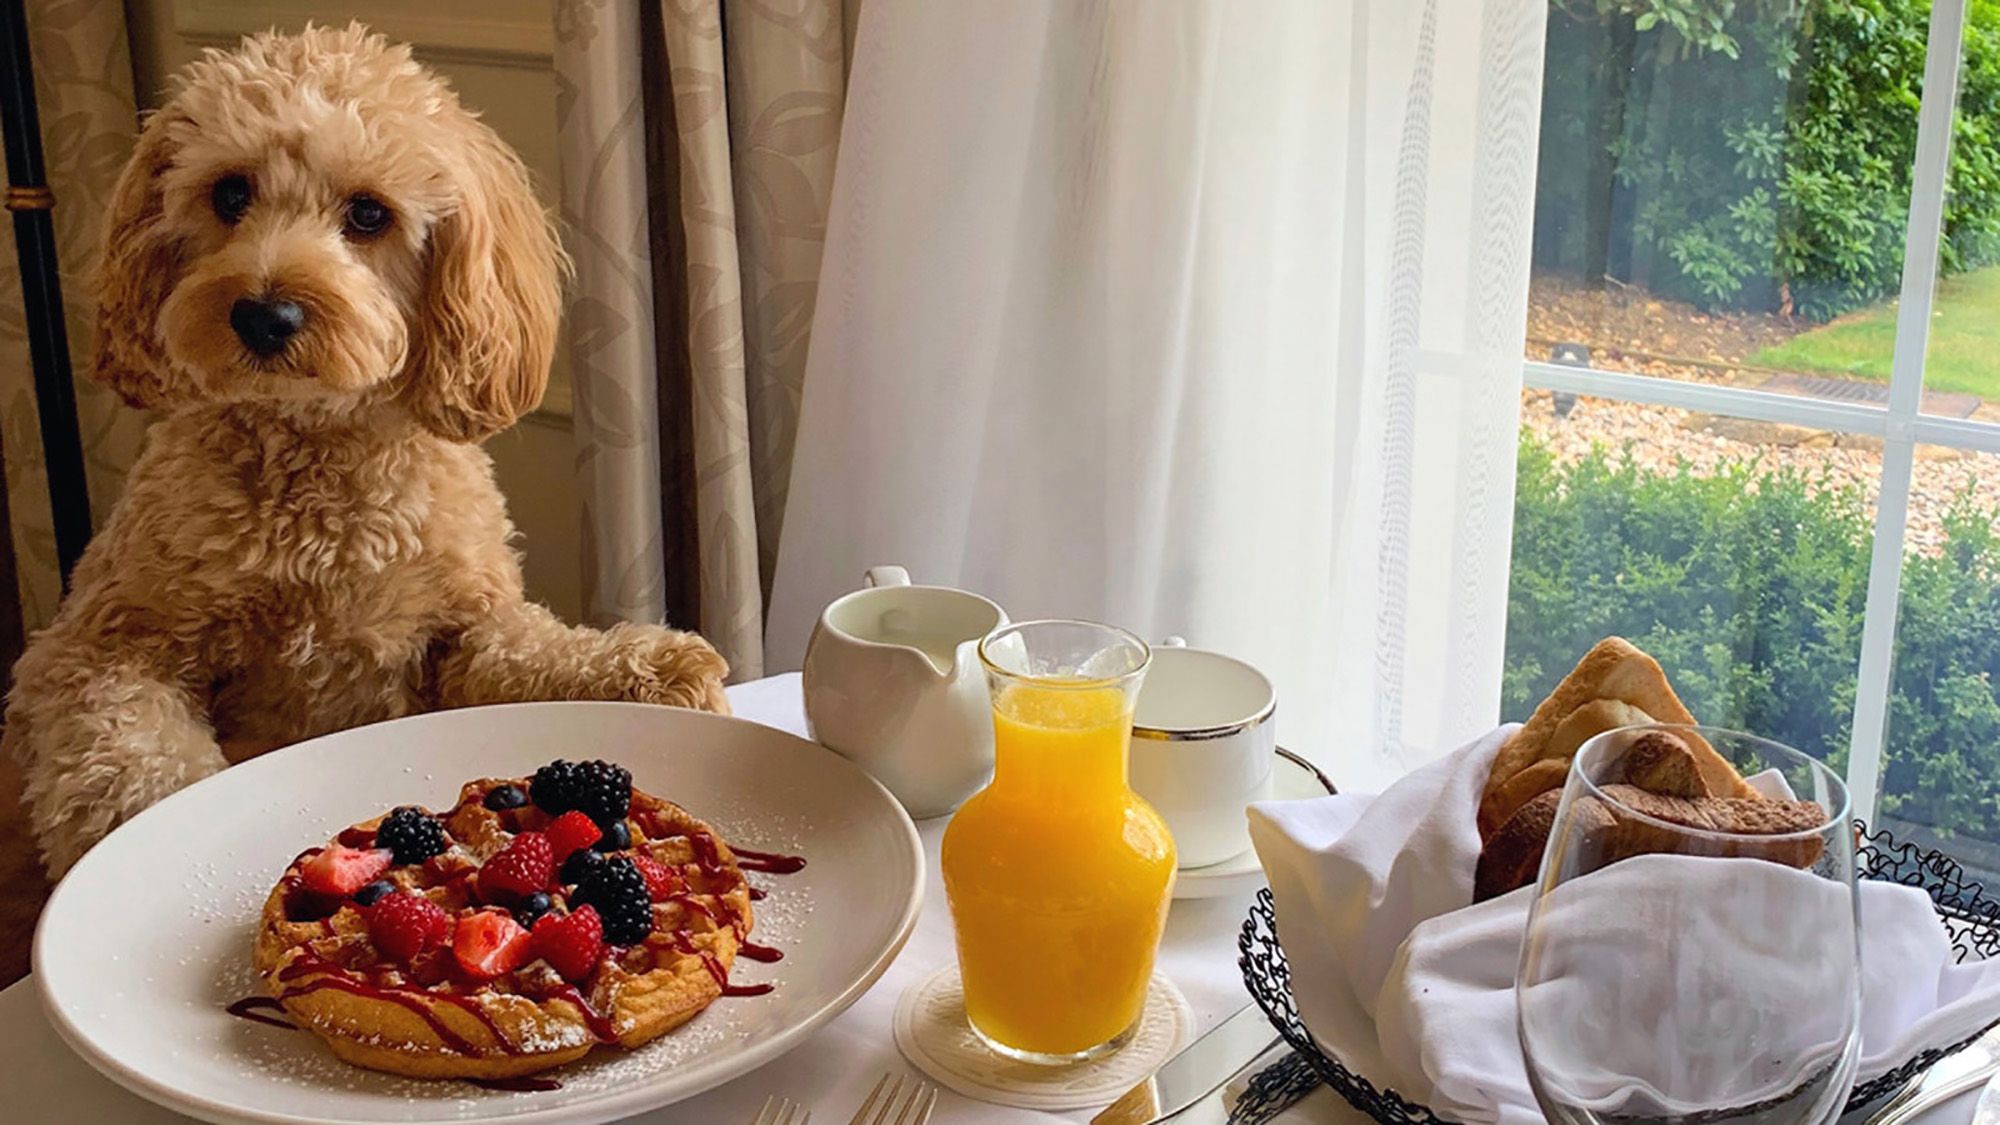 The dogfriendly hotels in the UK to check into with your pooch